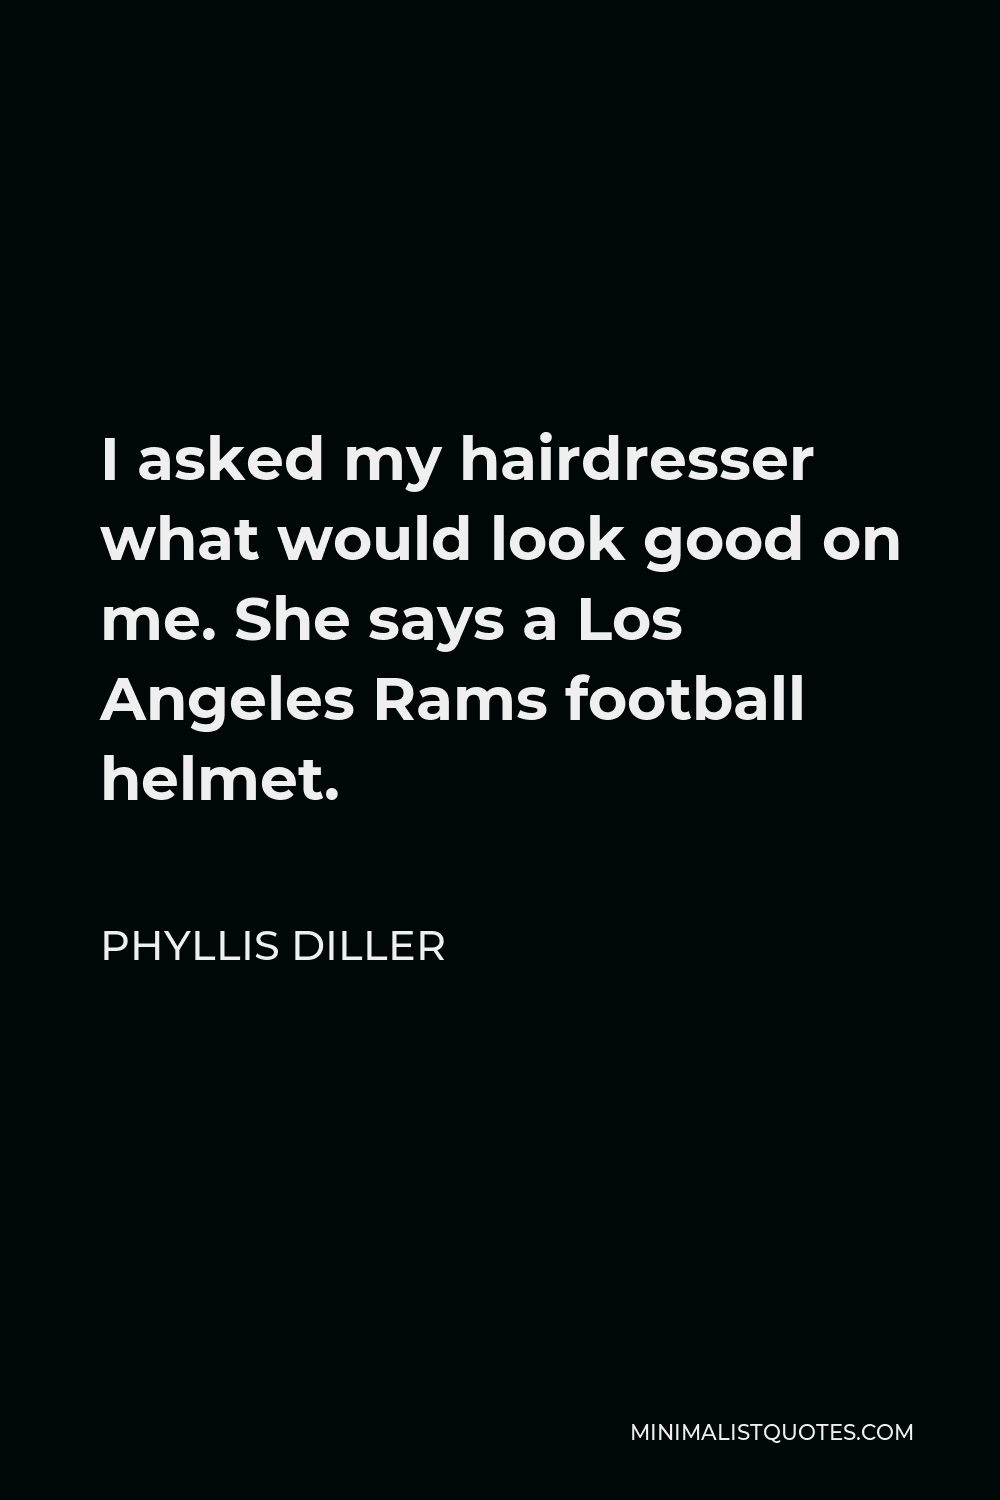 Phyllis Diller Quote - I asked my hairdresser what would look good on me. She says a Los Angeles Rams football helmet.